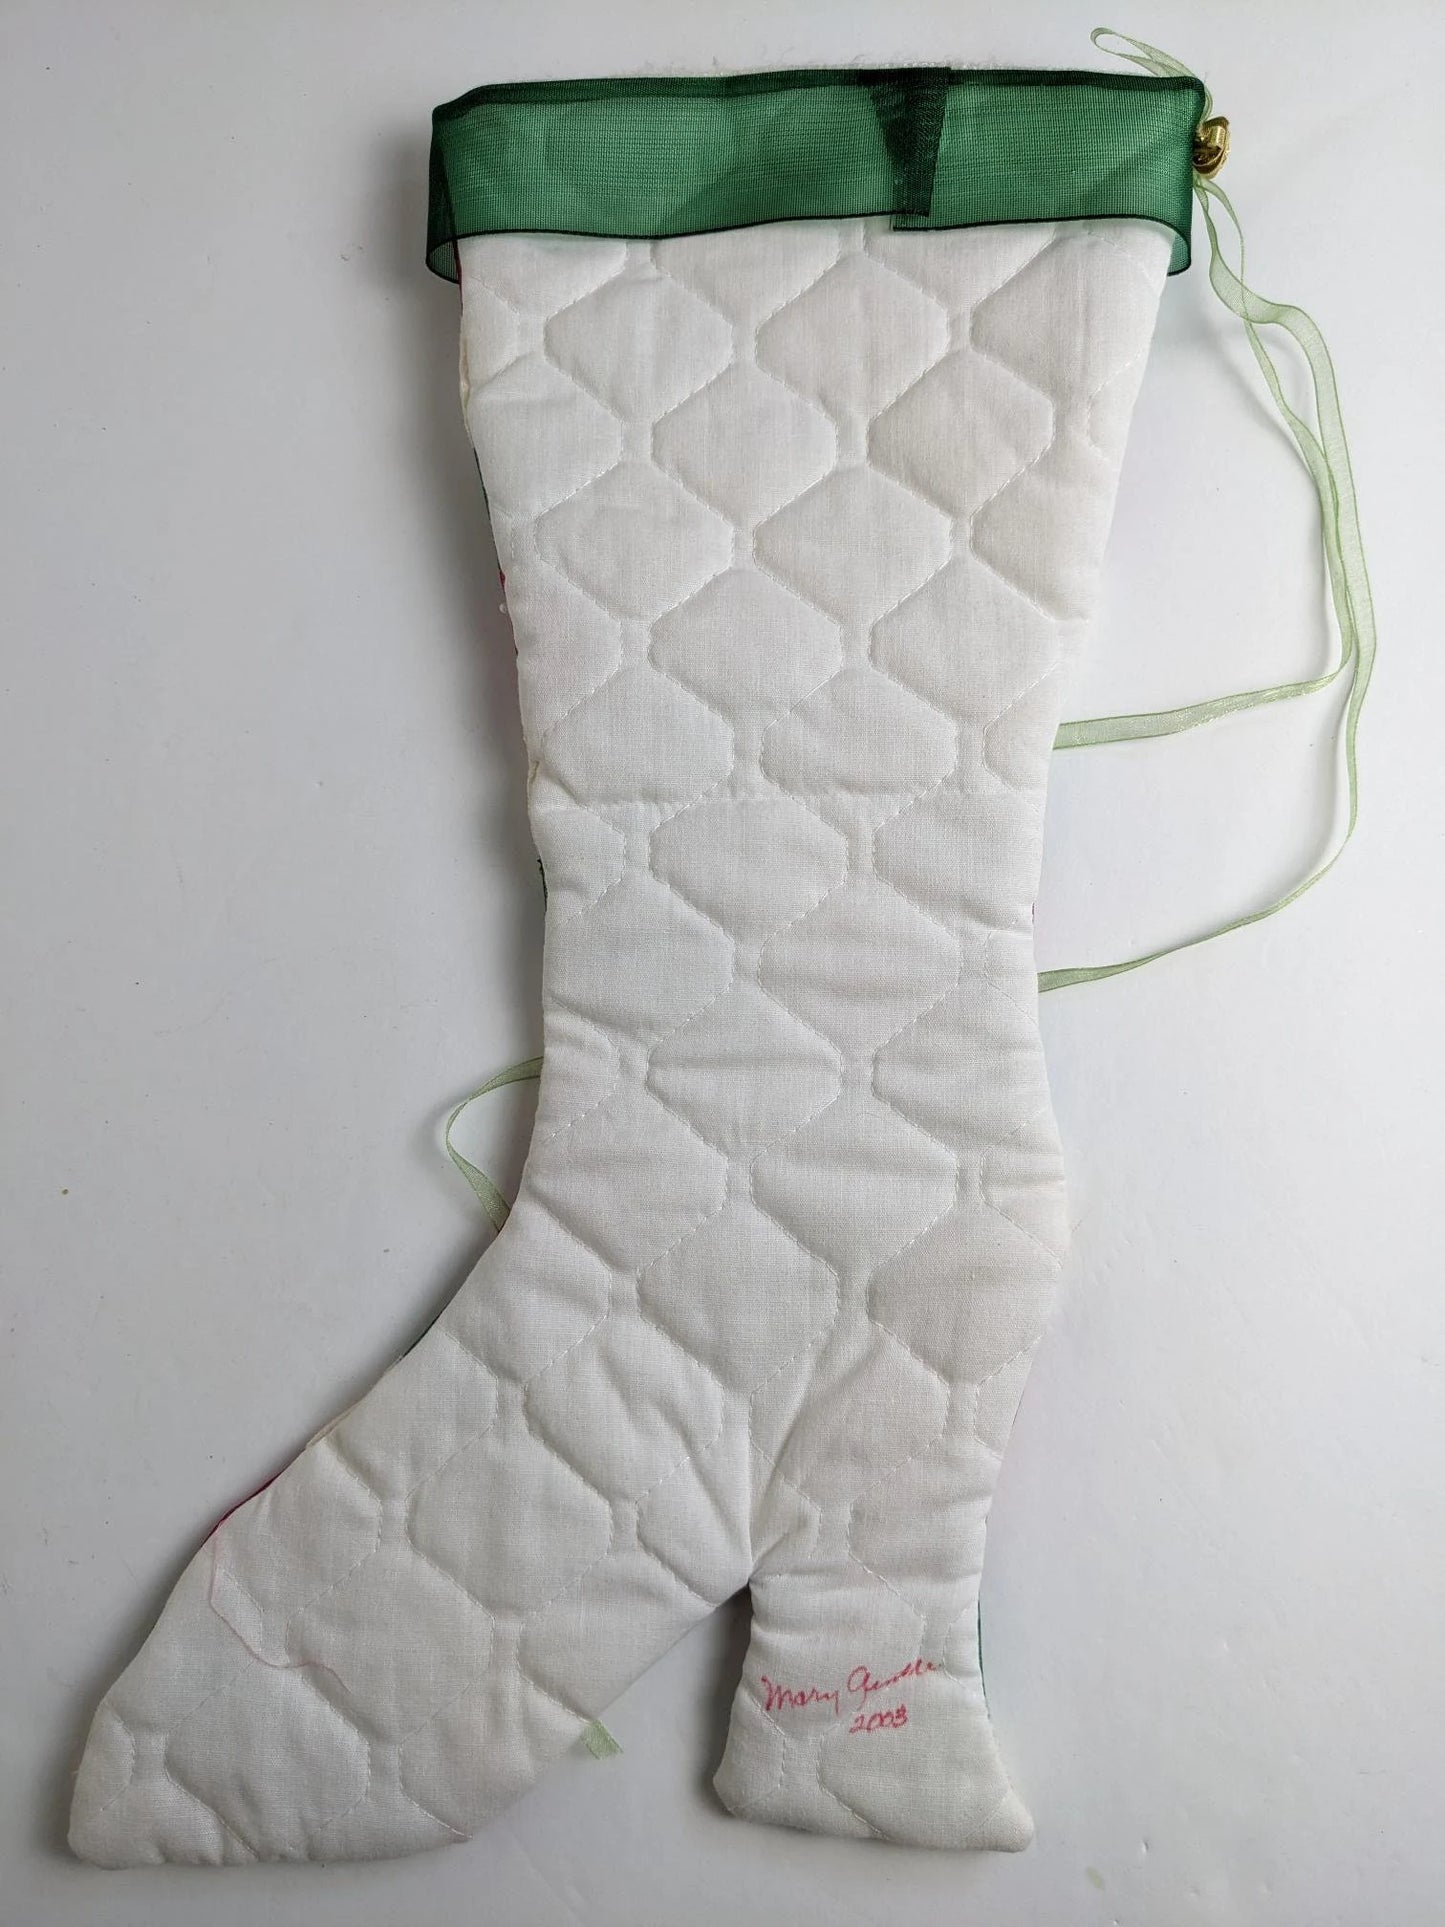 Quilted High Heel Christmas Stocking